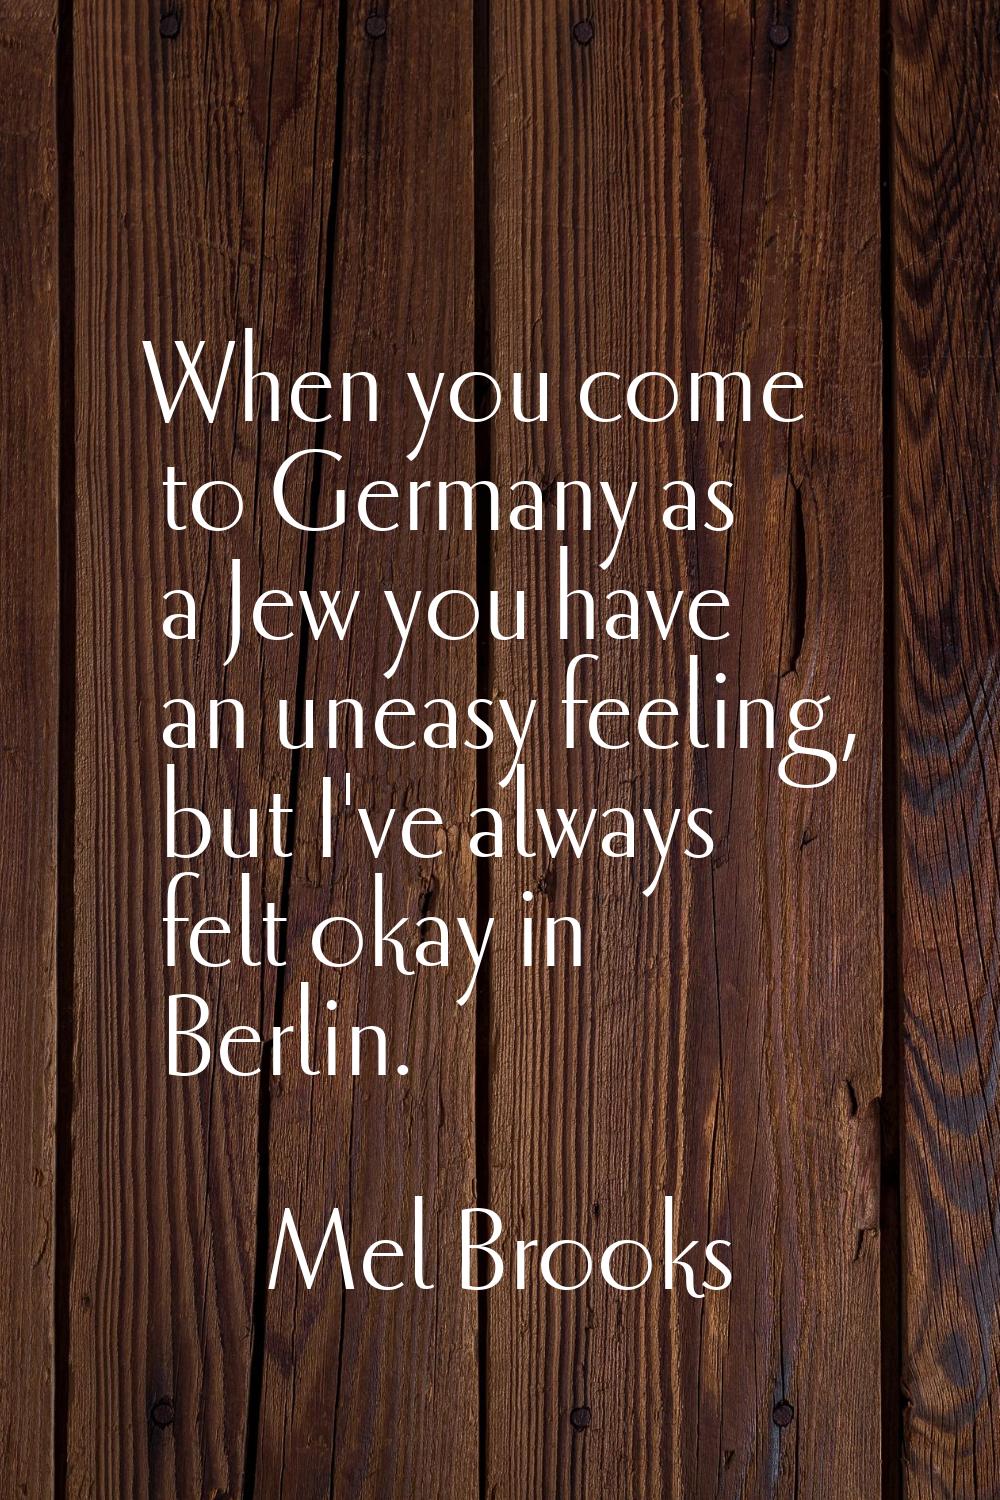 When you come to Germany as a Jew you have an uneasy feeling, but I've always felt okay in Berlin.